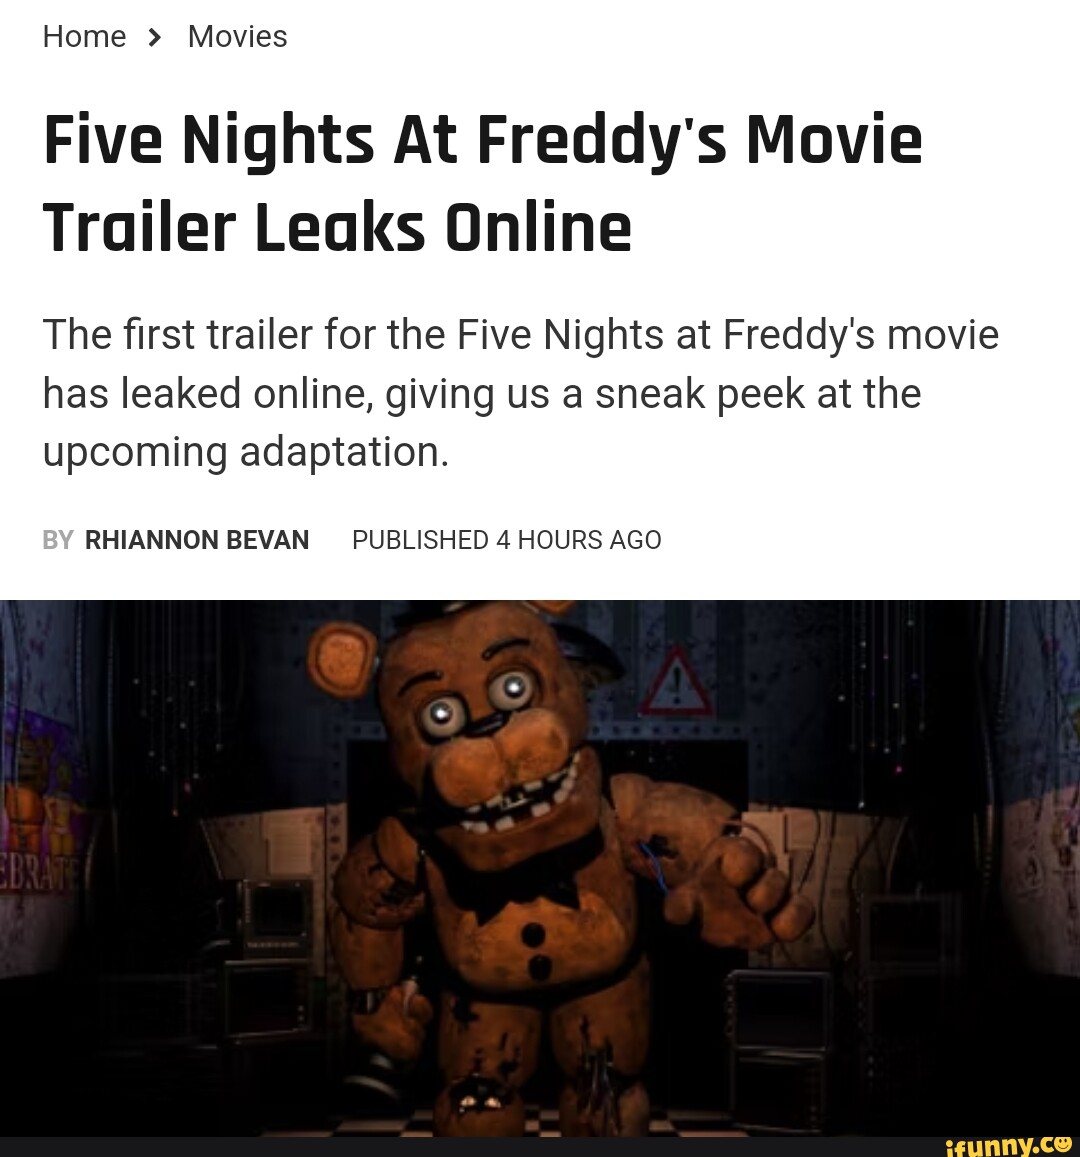 Home > Movies Five Nights At Freddy's Movie Trailer Leaks Online The